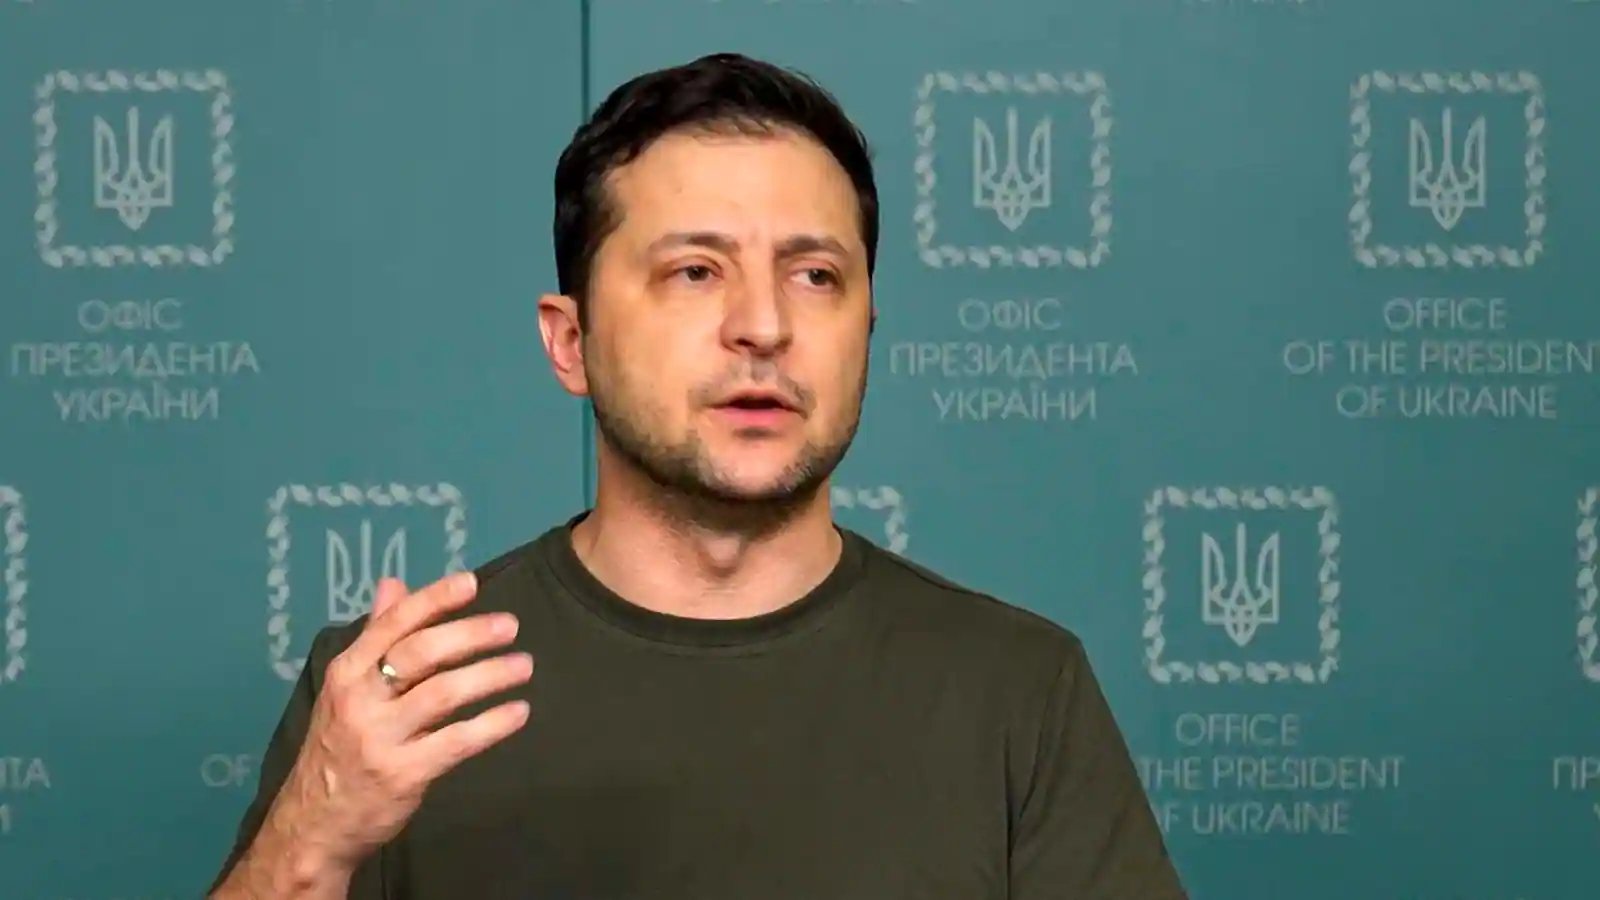 “Save your lives and leave” Ukraine President advice to Russian Troops